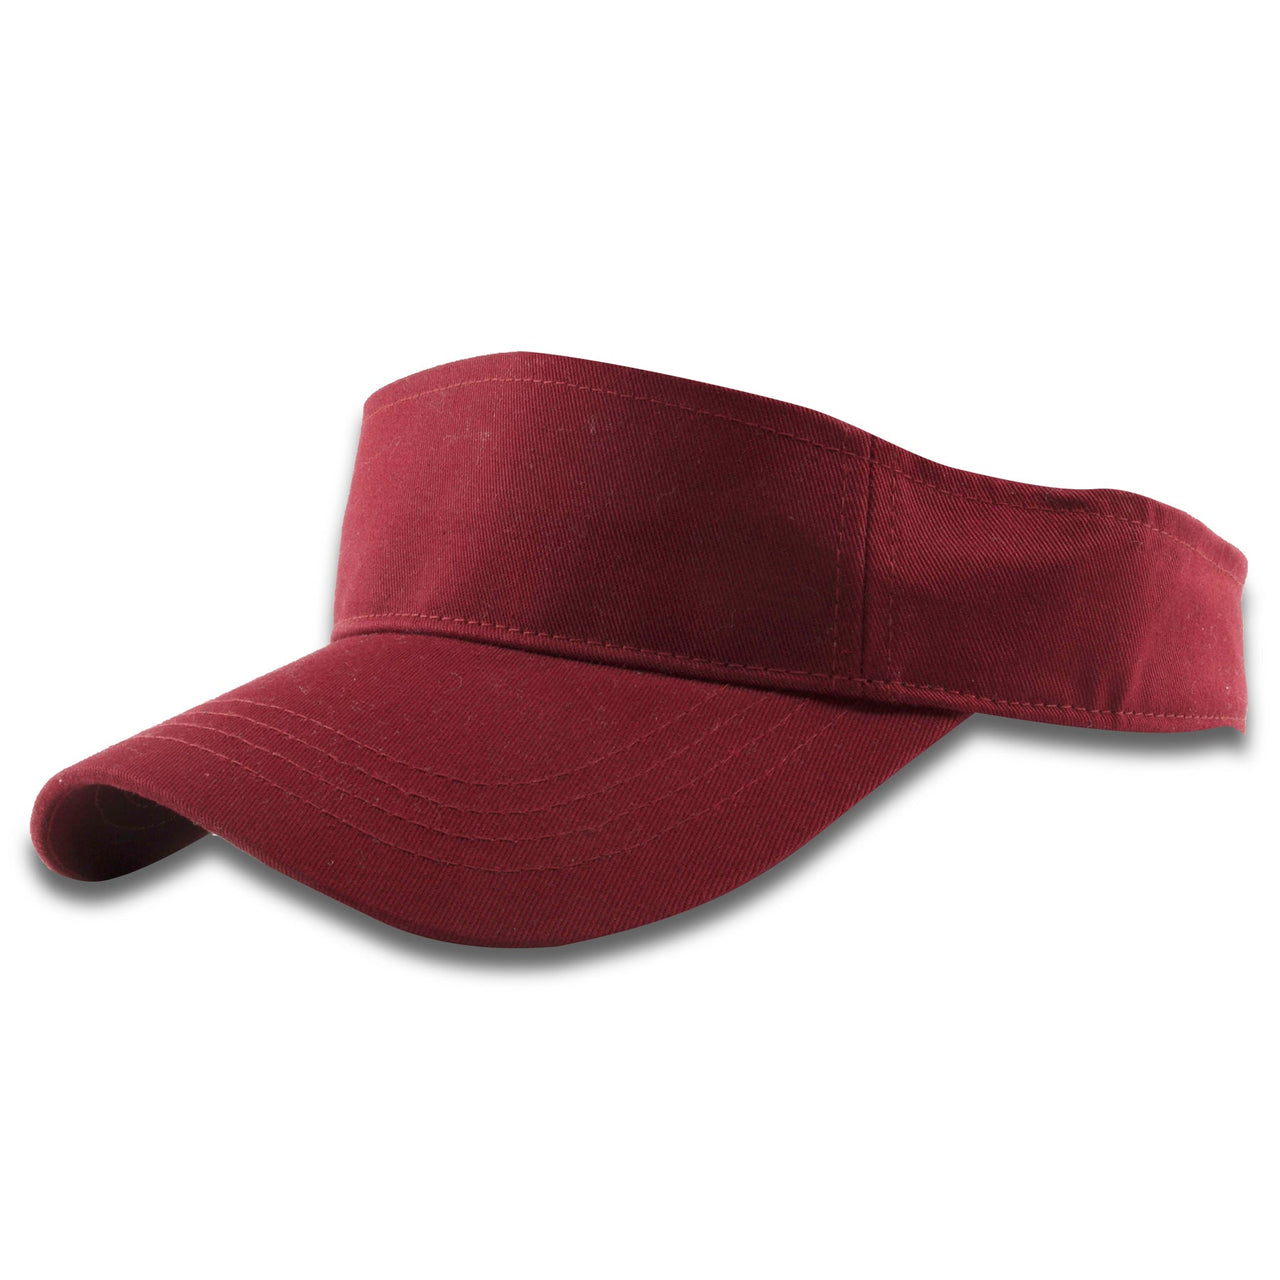 The burgundy blank adjustable visor is made out of cotton